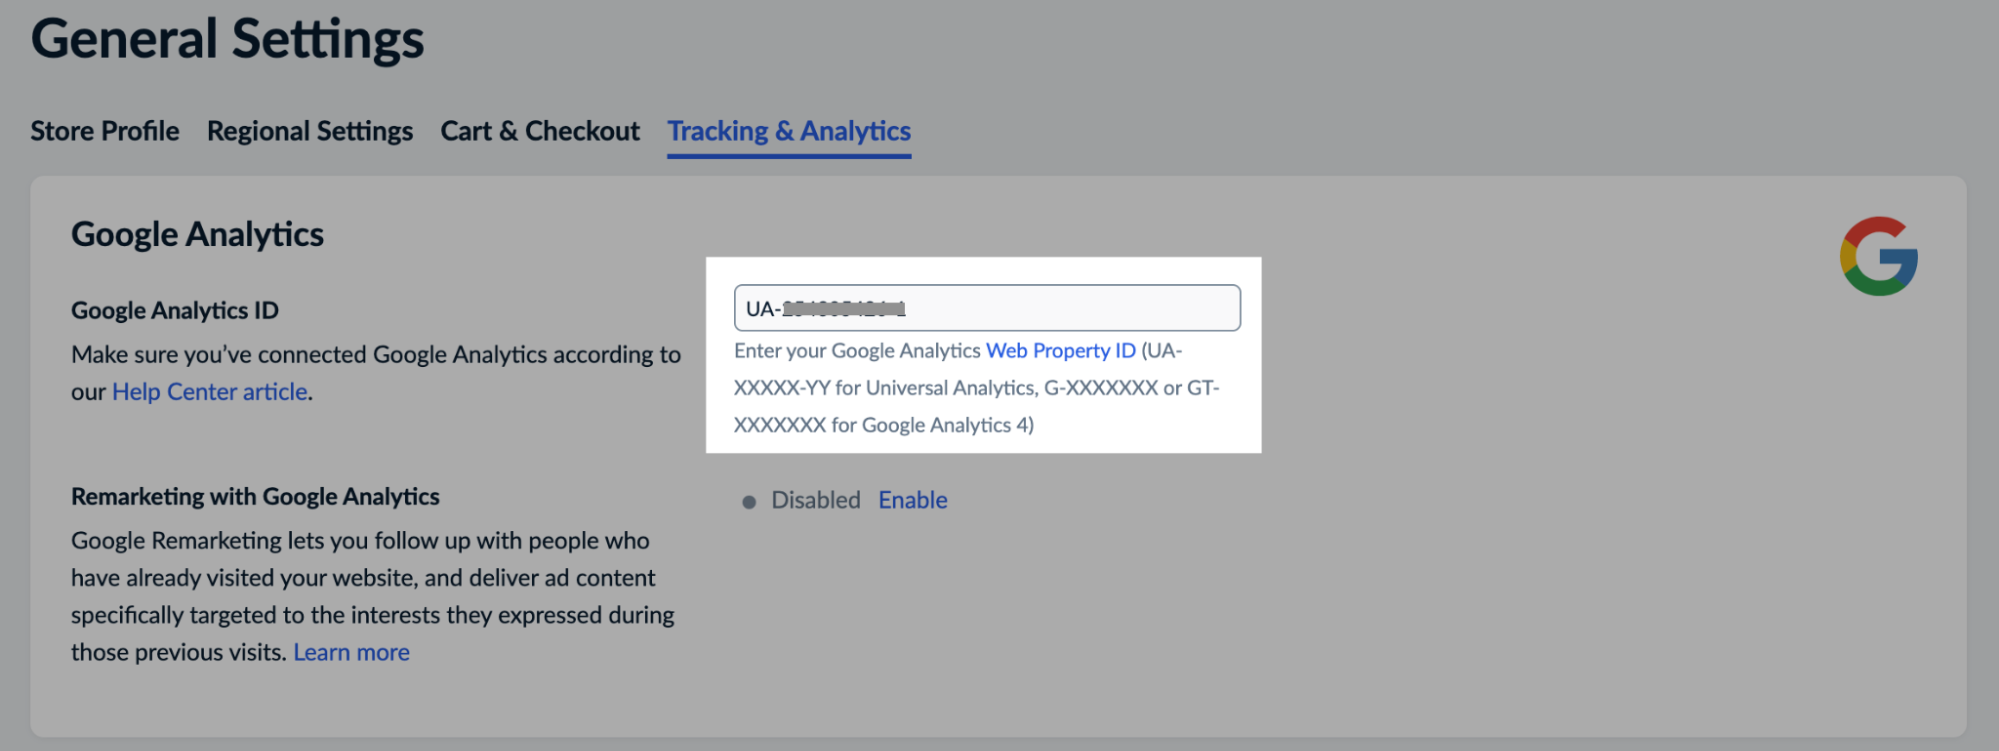 nabling_Google_Analytics_for_your_store__5_.png